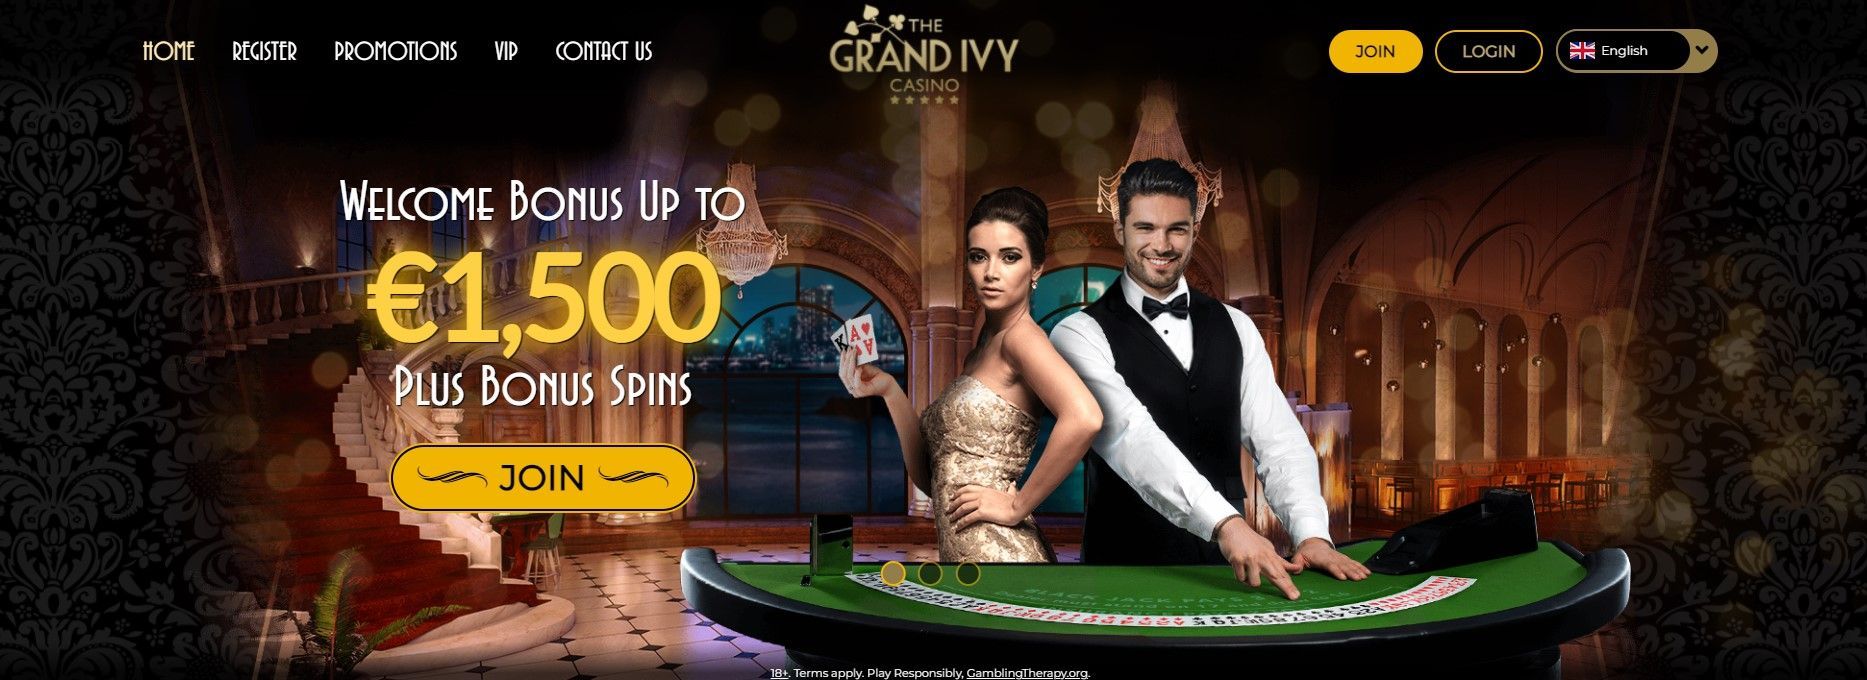 grand ivy online casino Offer from Go Gambling